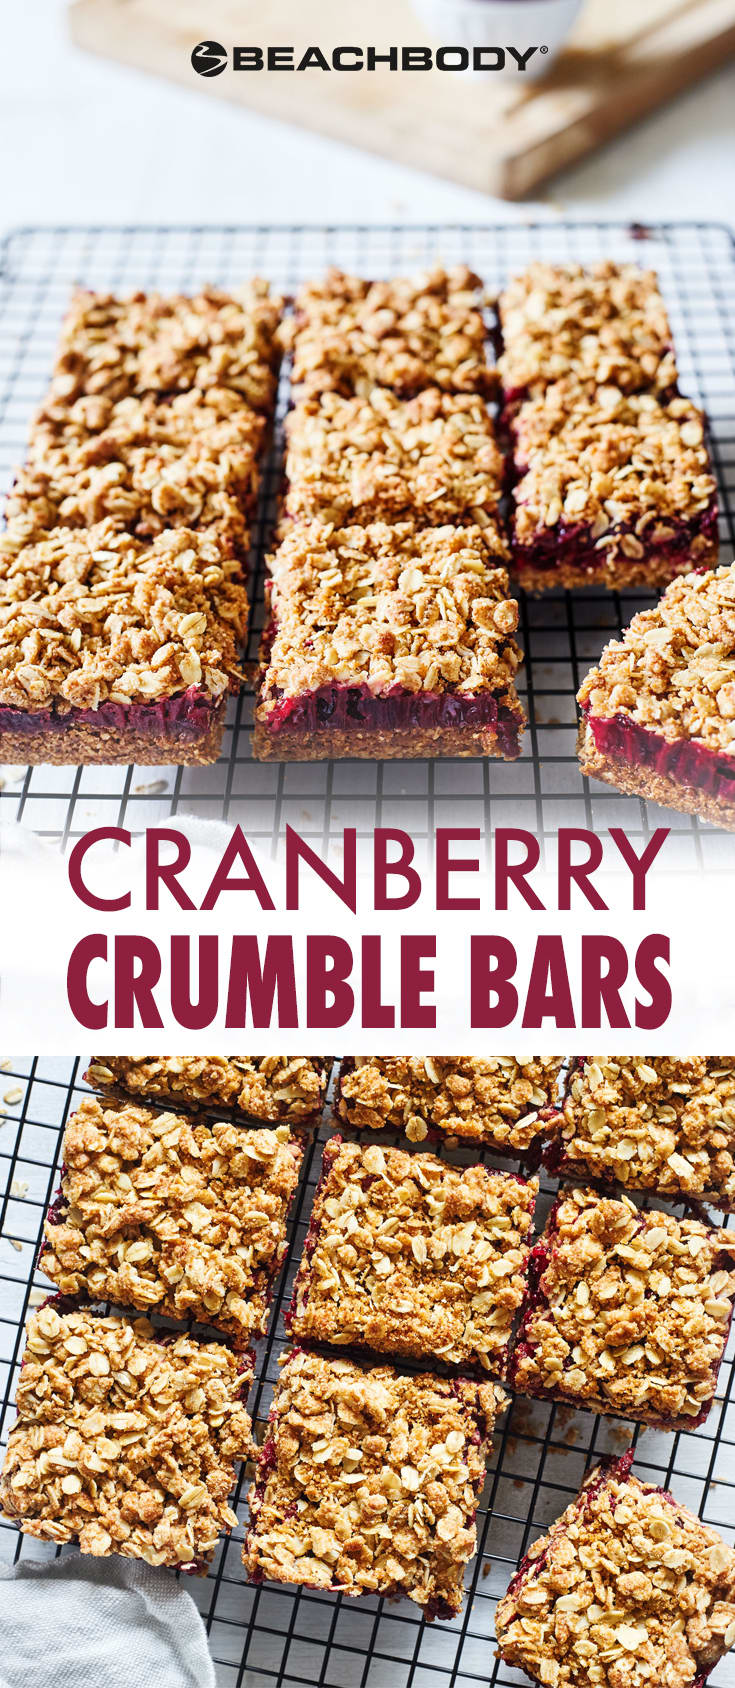 These mouthwatering Cranberry Crumble Bars feature a sweet and tart cranberry orange filling on a dense pastry crust topped with crisp oats.